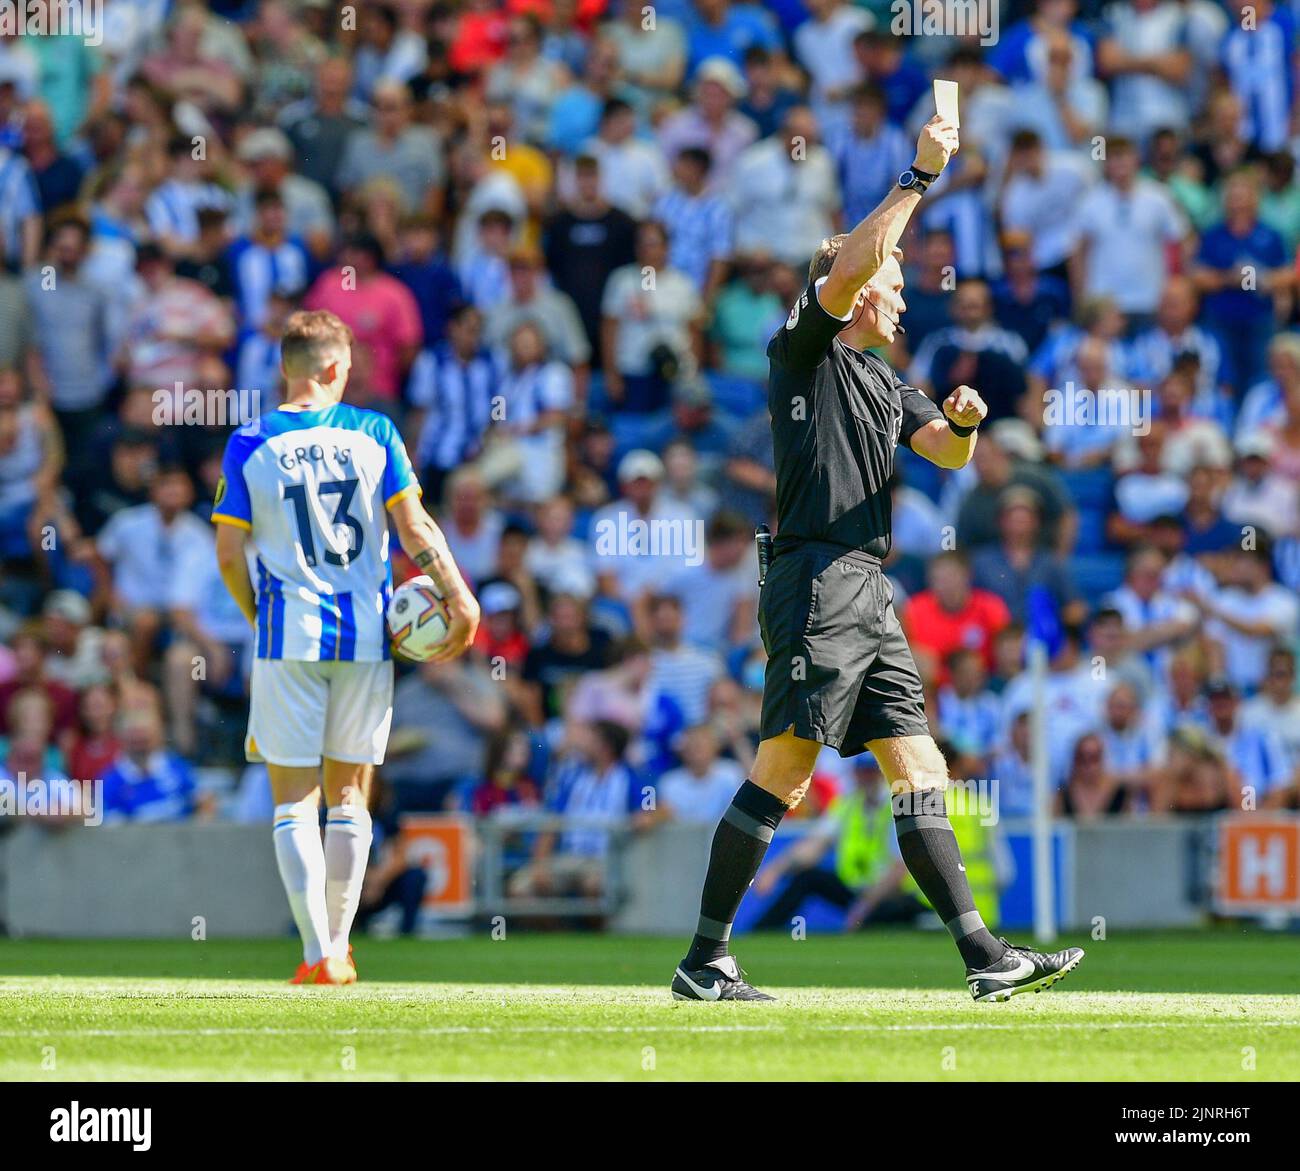 Brighton, UK. 13th Aug, 2022. Alexis Mac Allister of Brighton and Hove Albion receives a yellow card for pulling on the shirt of Miguel Almiron of Newcastle United during the Premier League match between Brighton & Hove Albion and Newcastle United at The Amex on August 13th 2022 in Brighton, England. (Photo by Jeff Mood/phcimages.com) Credit: PHC Images/Alamy Live News Stock Photo